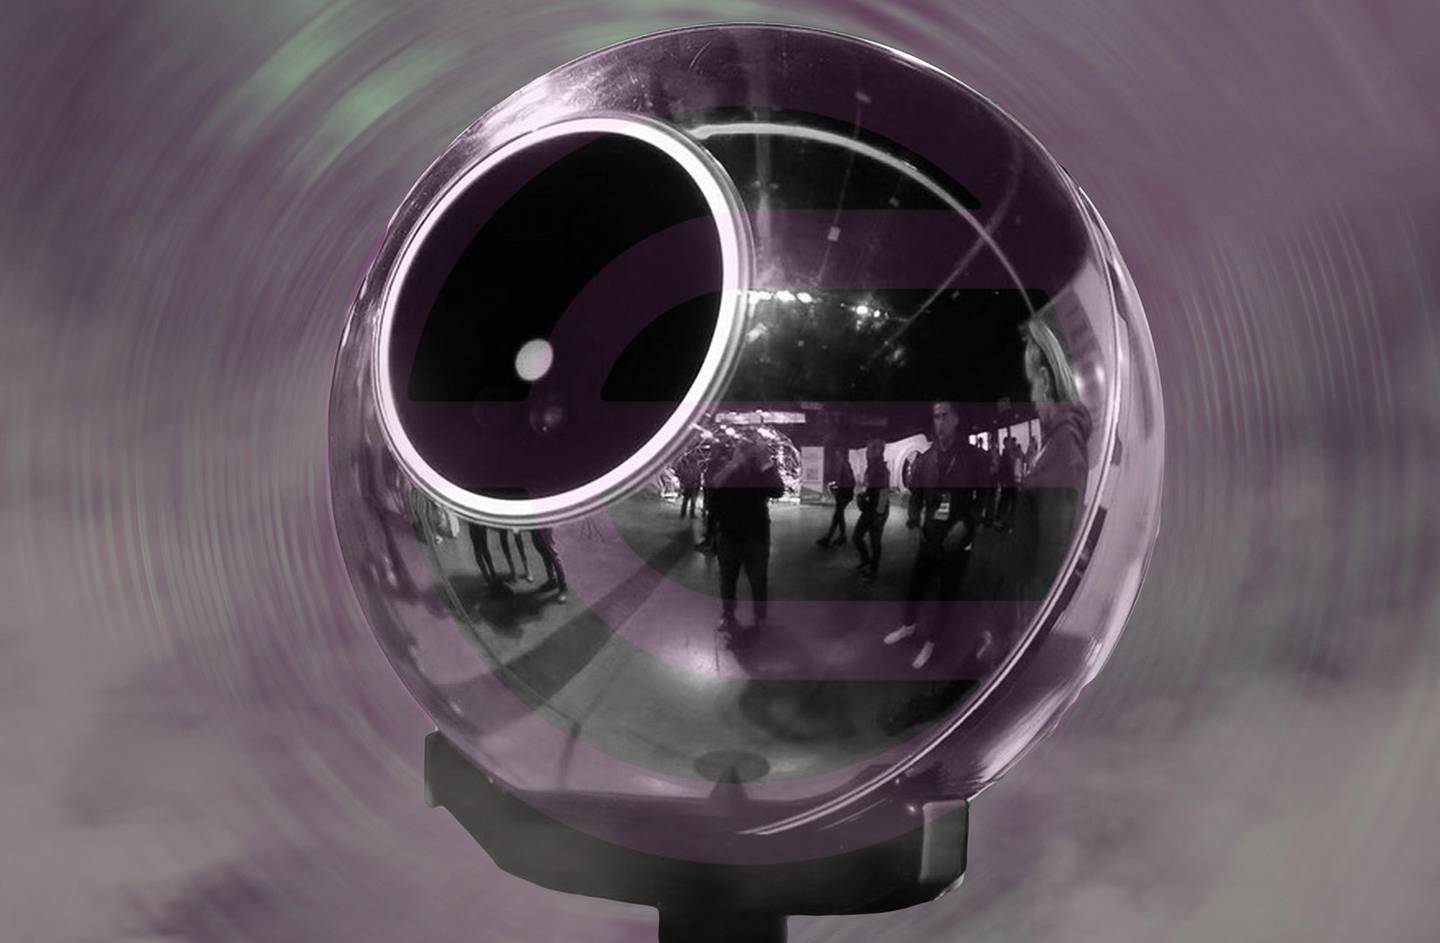 Portrait of the Worldcoin coin orb, with a superimposed Worldcoin logo, over a blurry background.